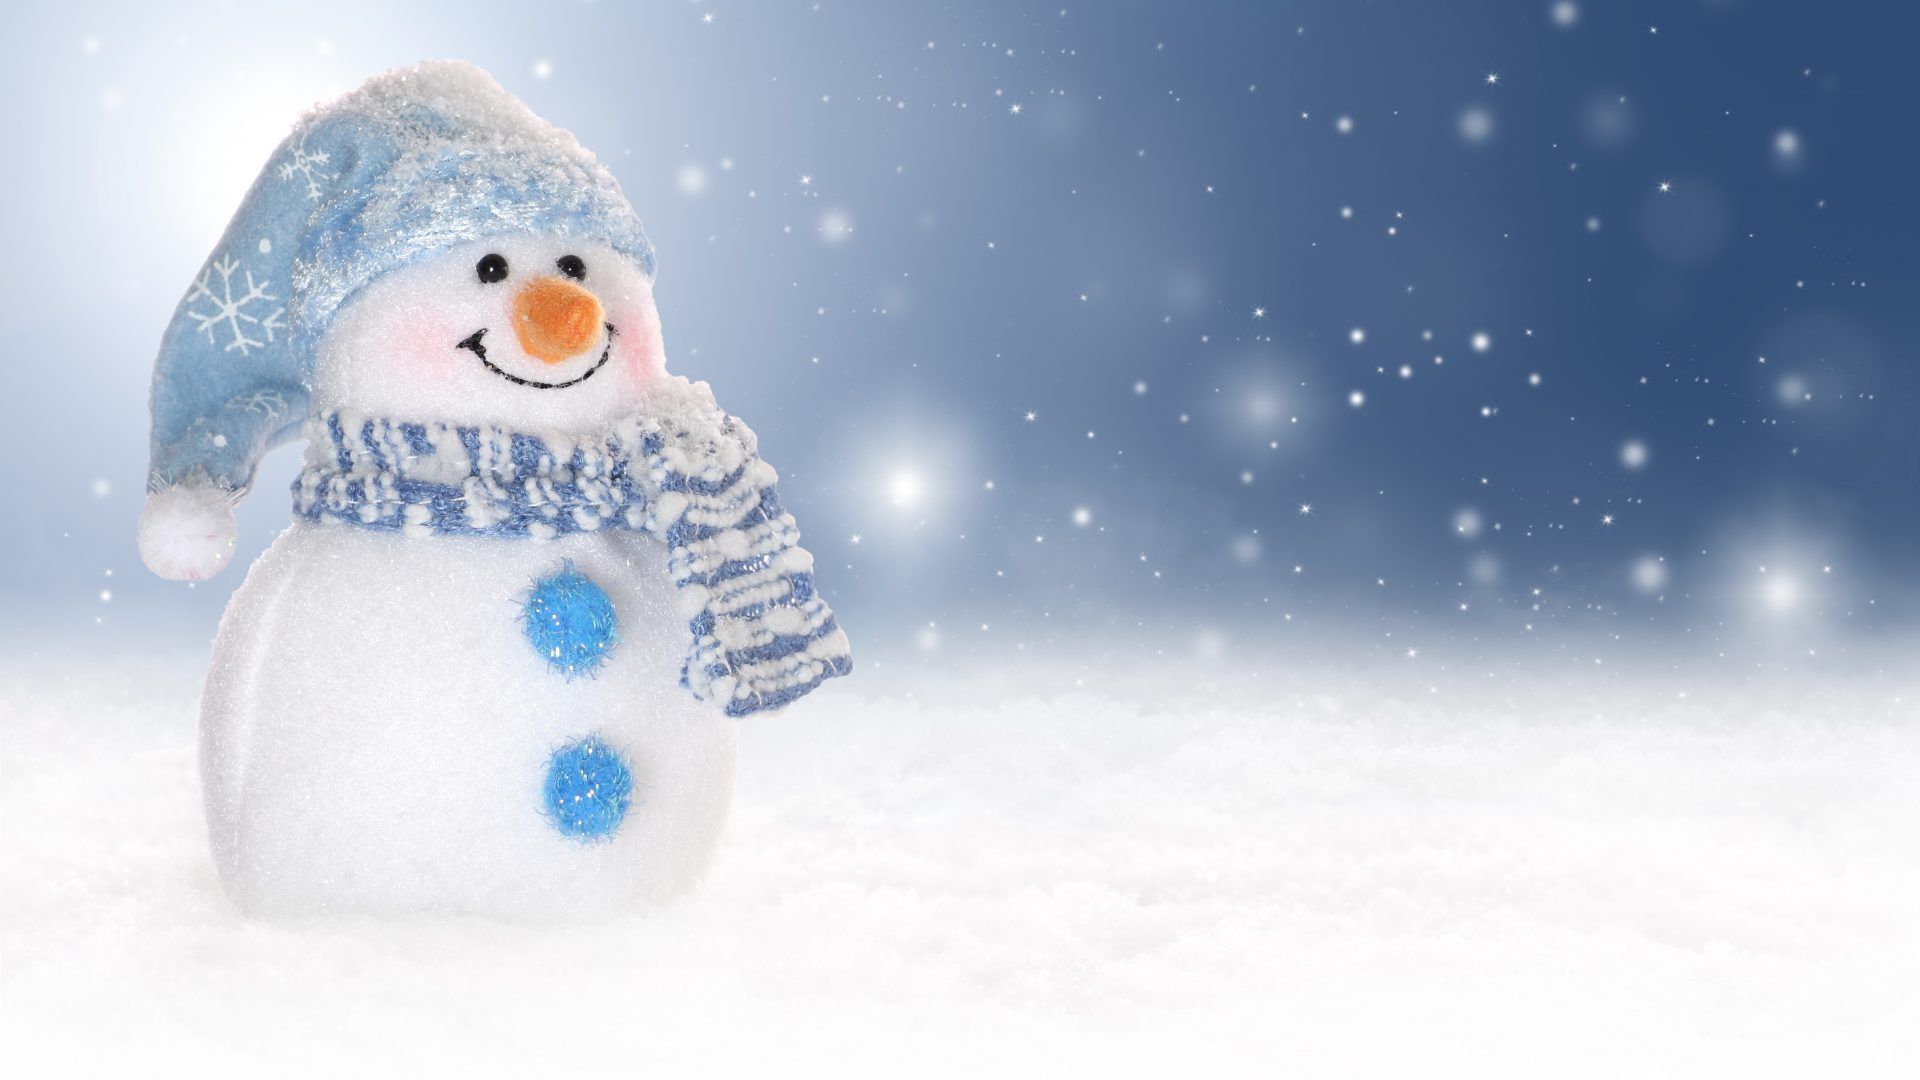 Winter Snowman Snow Xmas Cute Christmas Characters Desktop Background For Free 1920×1. Snowman Wallpaper, Winter Background, Snowman Holiday Party